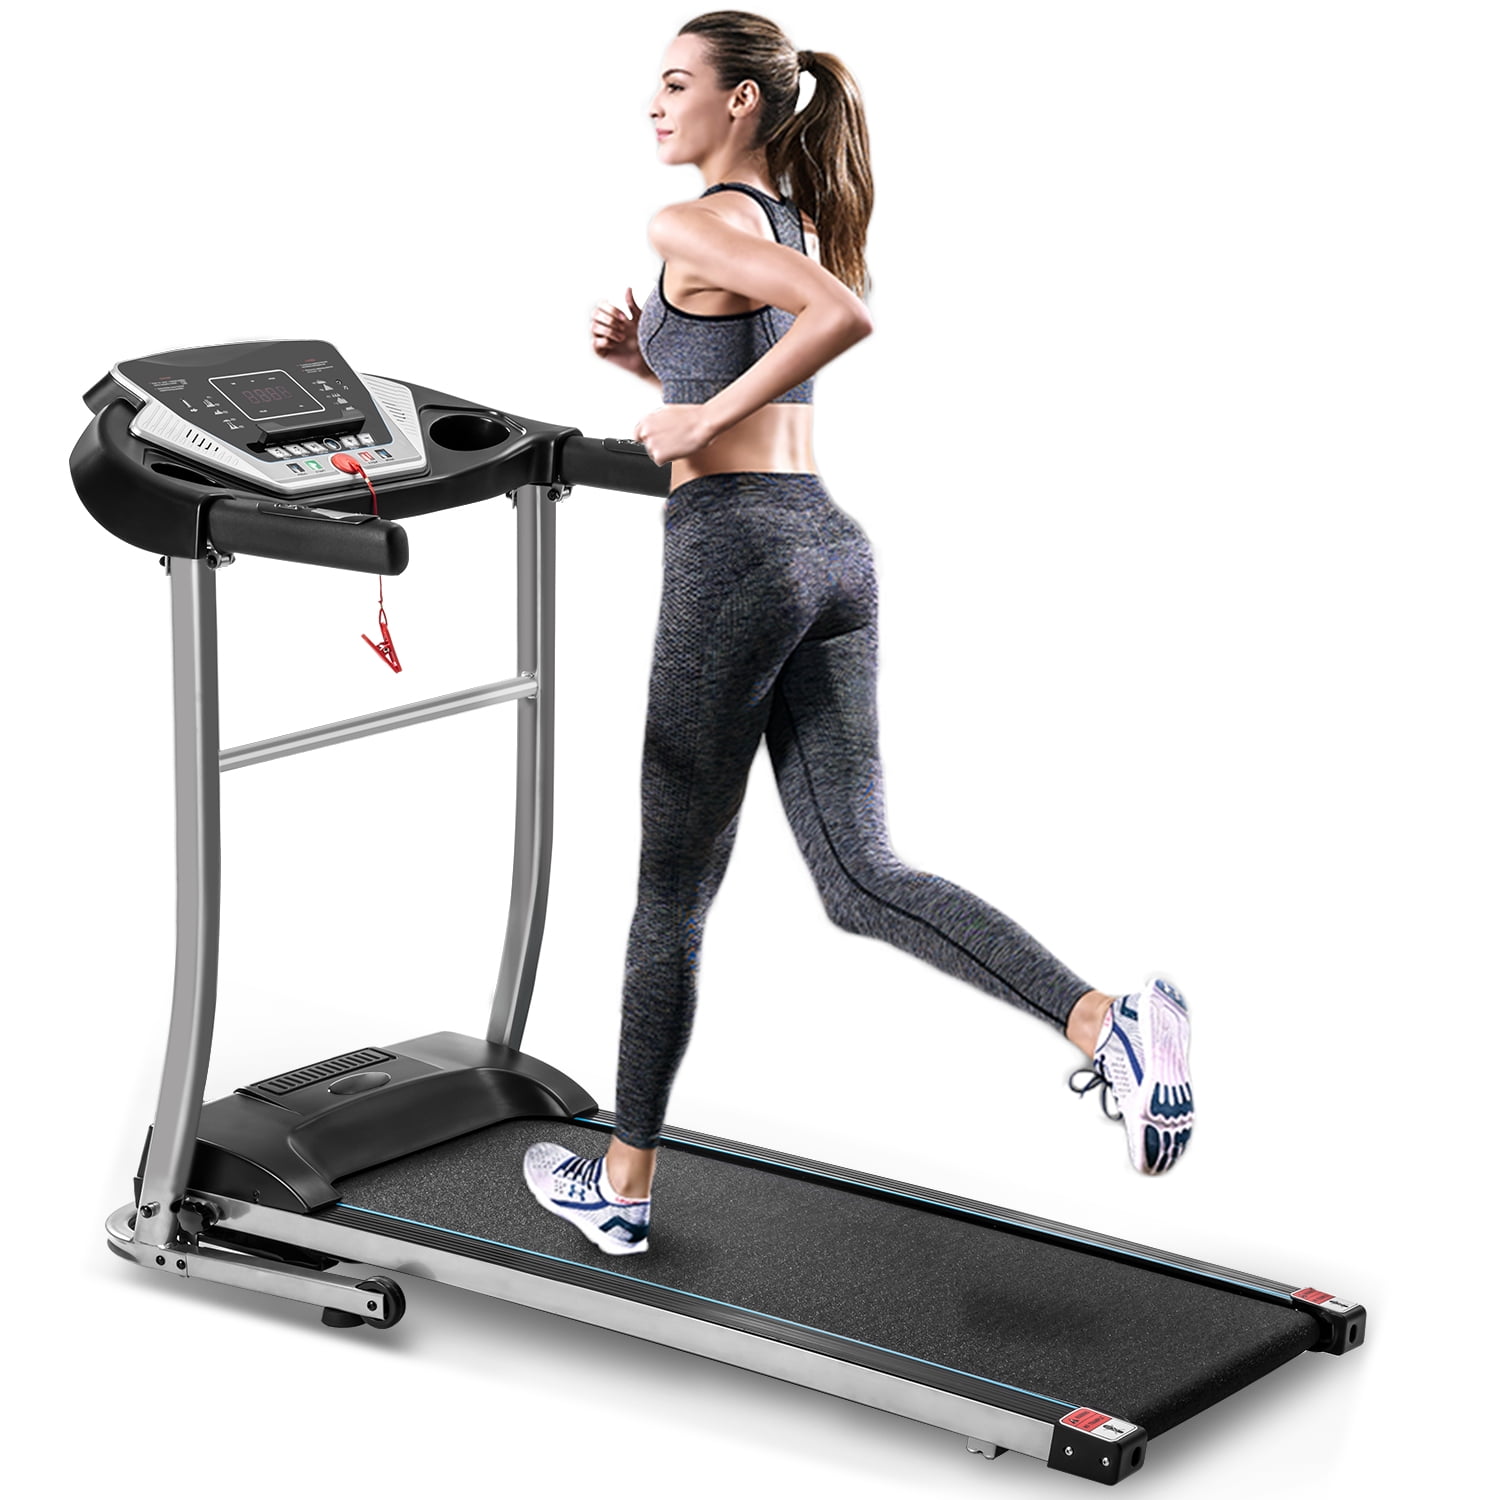 Folding Treadmill Easy Assembly Electric Folding Treadmill Ultra-Thin Portable for Home Gym Home Workouts cobcob Running Machine Jogging Walking Exercise 53.1 x 37.4 x 20.5 inches